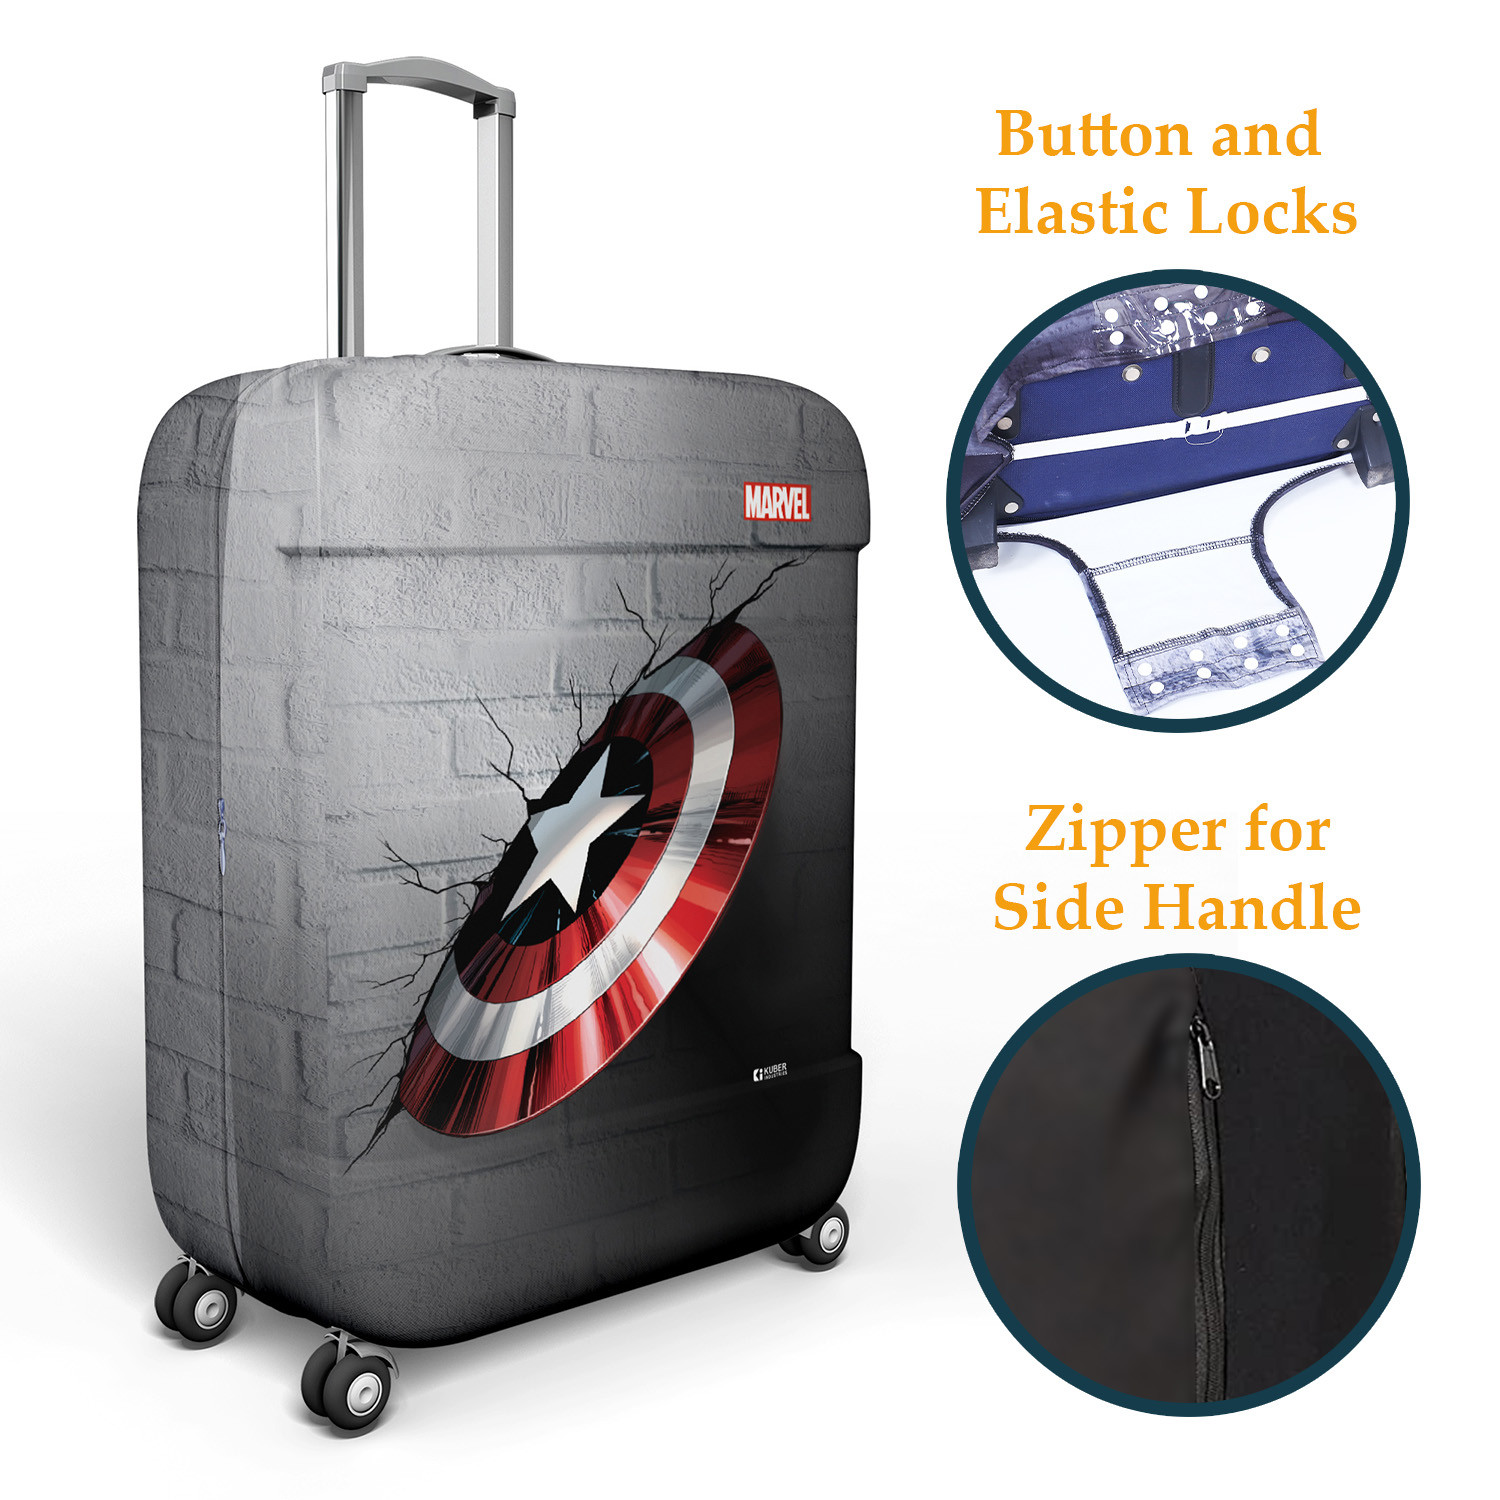 Kuber Industries Marvel Captain America Shield Luggage Cover | Polyester Travel Suitcase Cover | Washable | Stretchable Suitcase Cover | 22-26 Inch-Medium | 26-30 Inch-Large | Pack of 2 | Gray